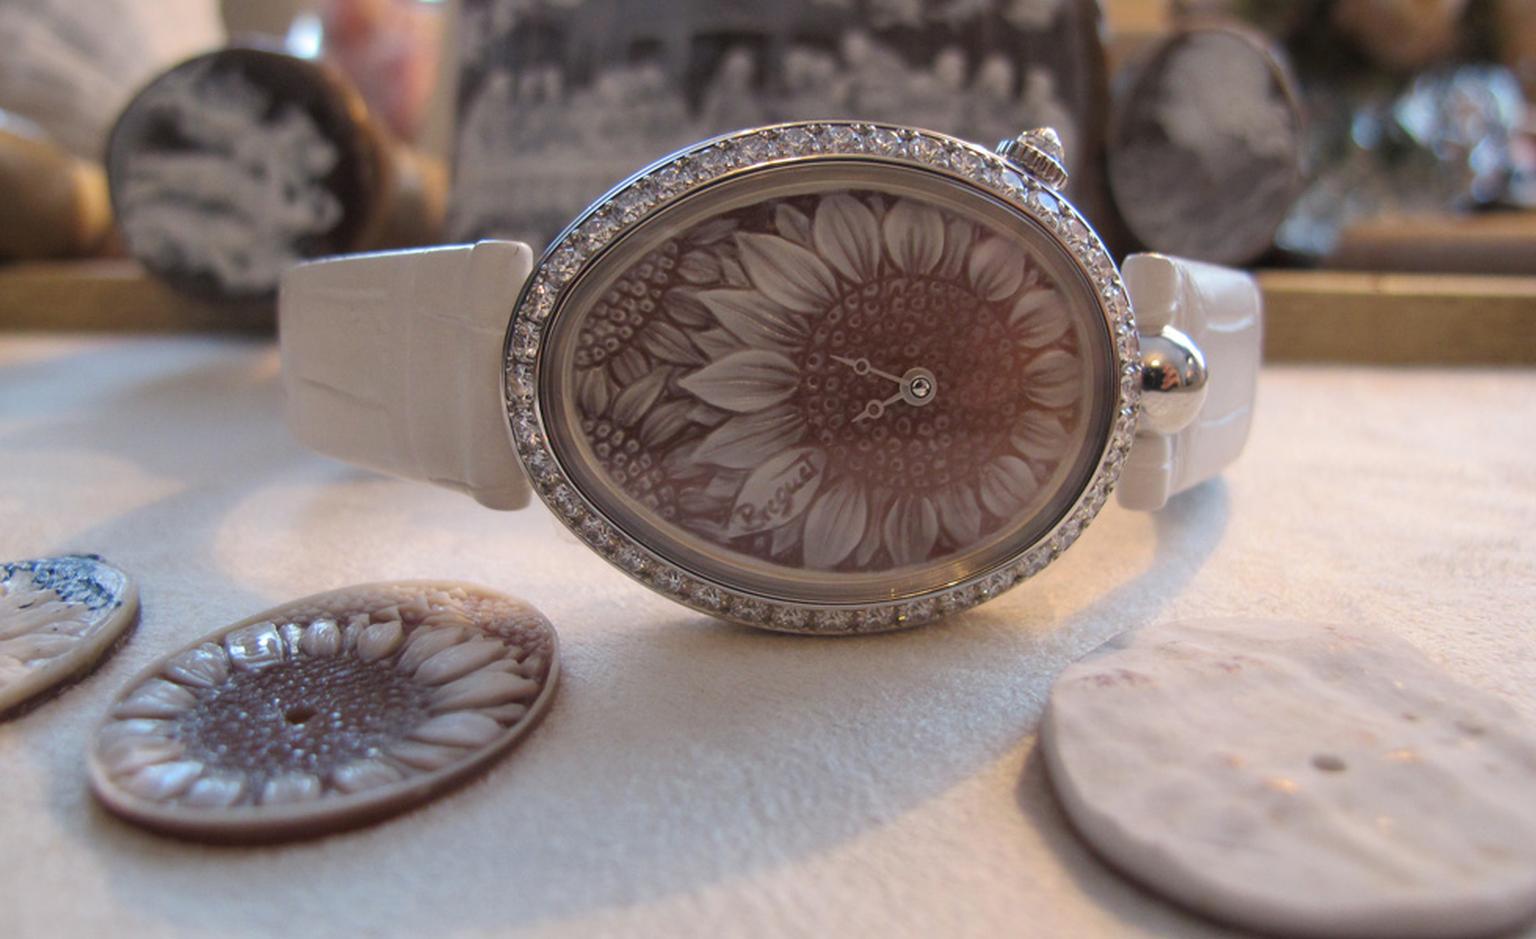 Breguet and the art of cameo carving